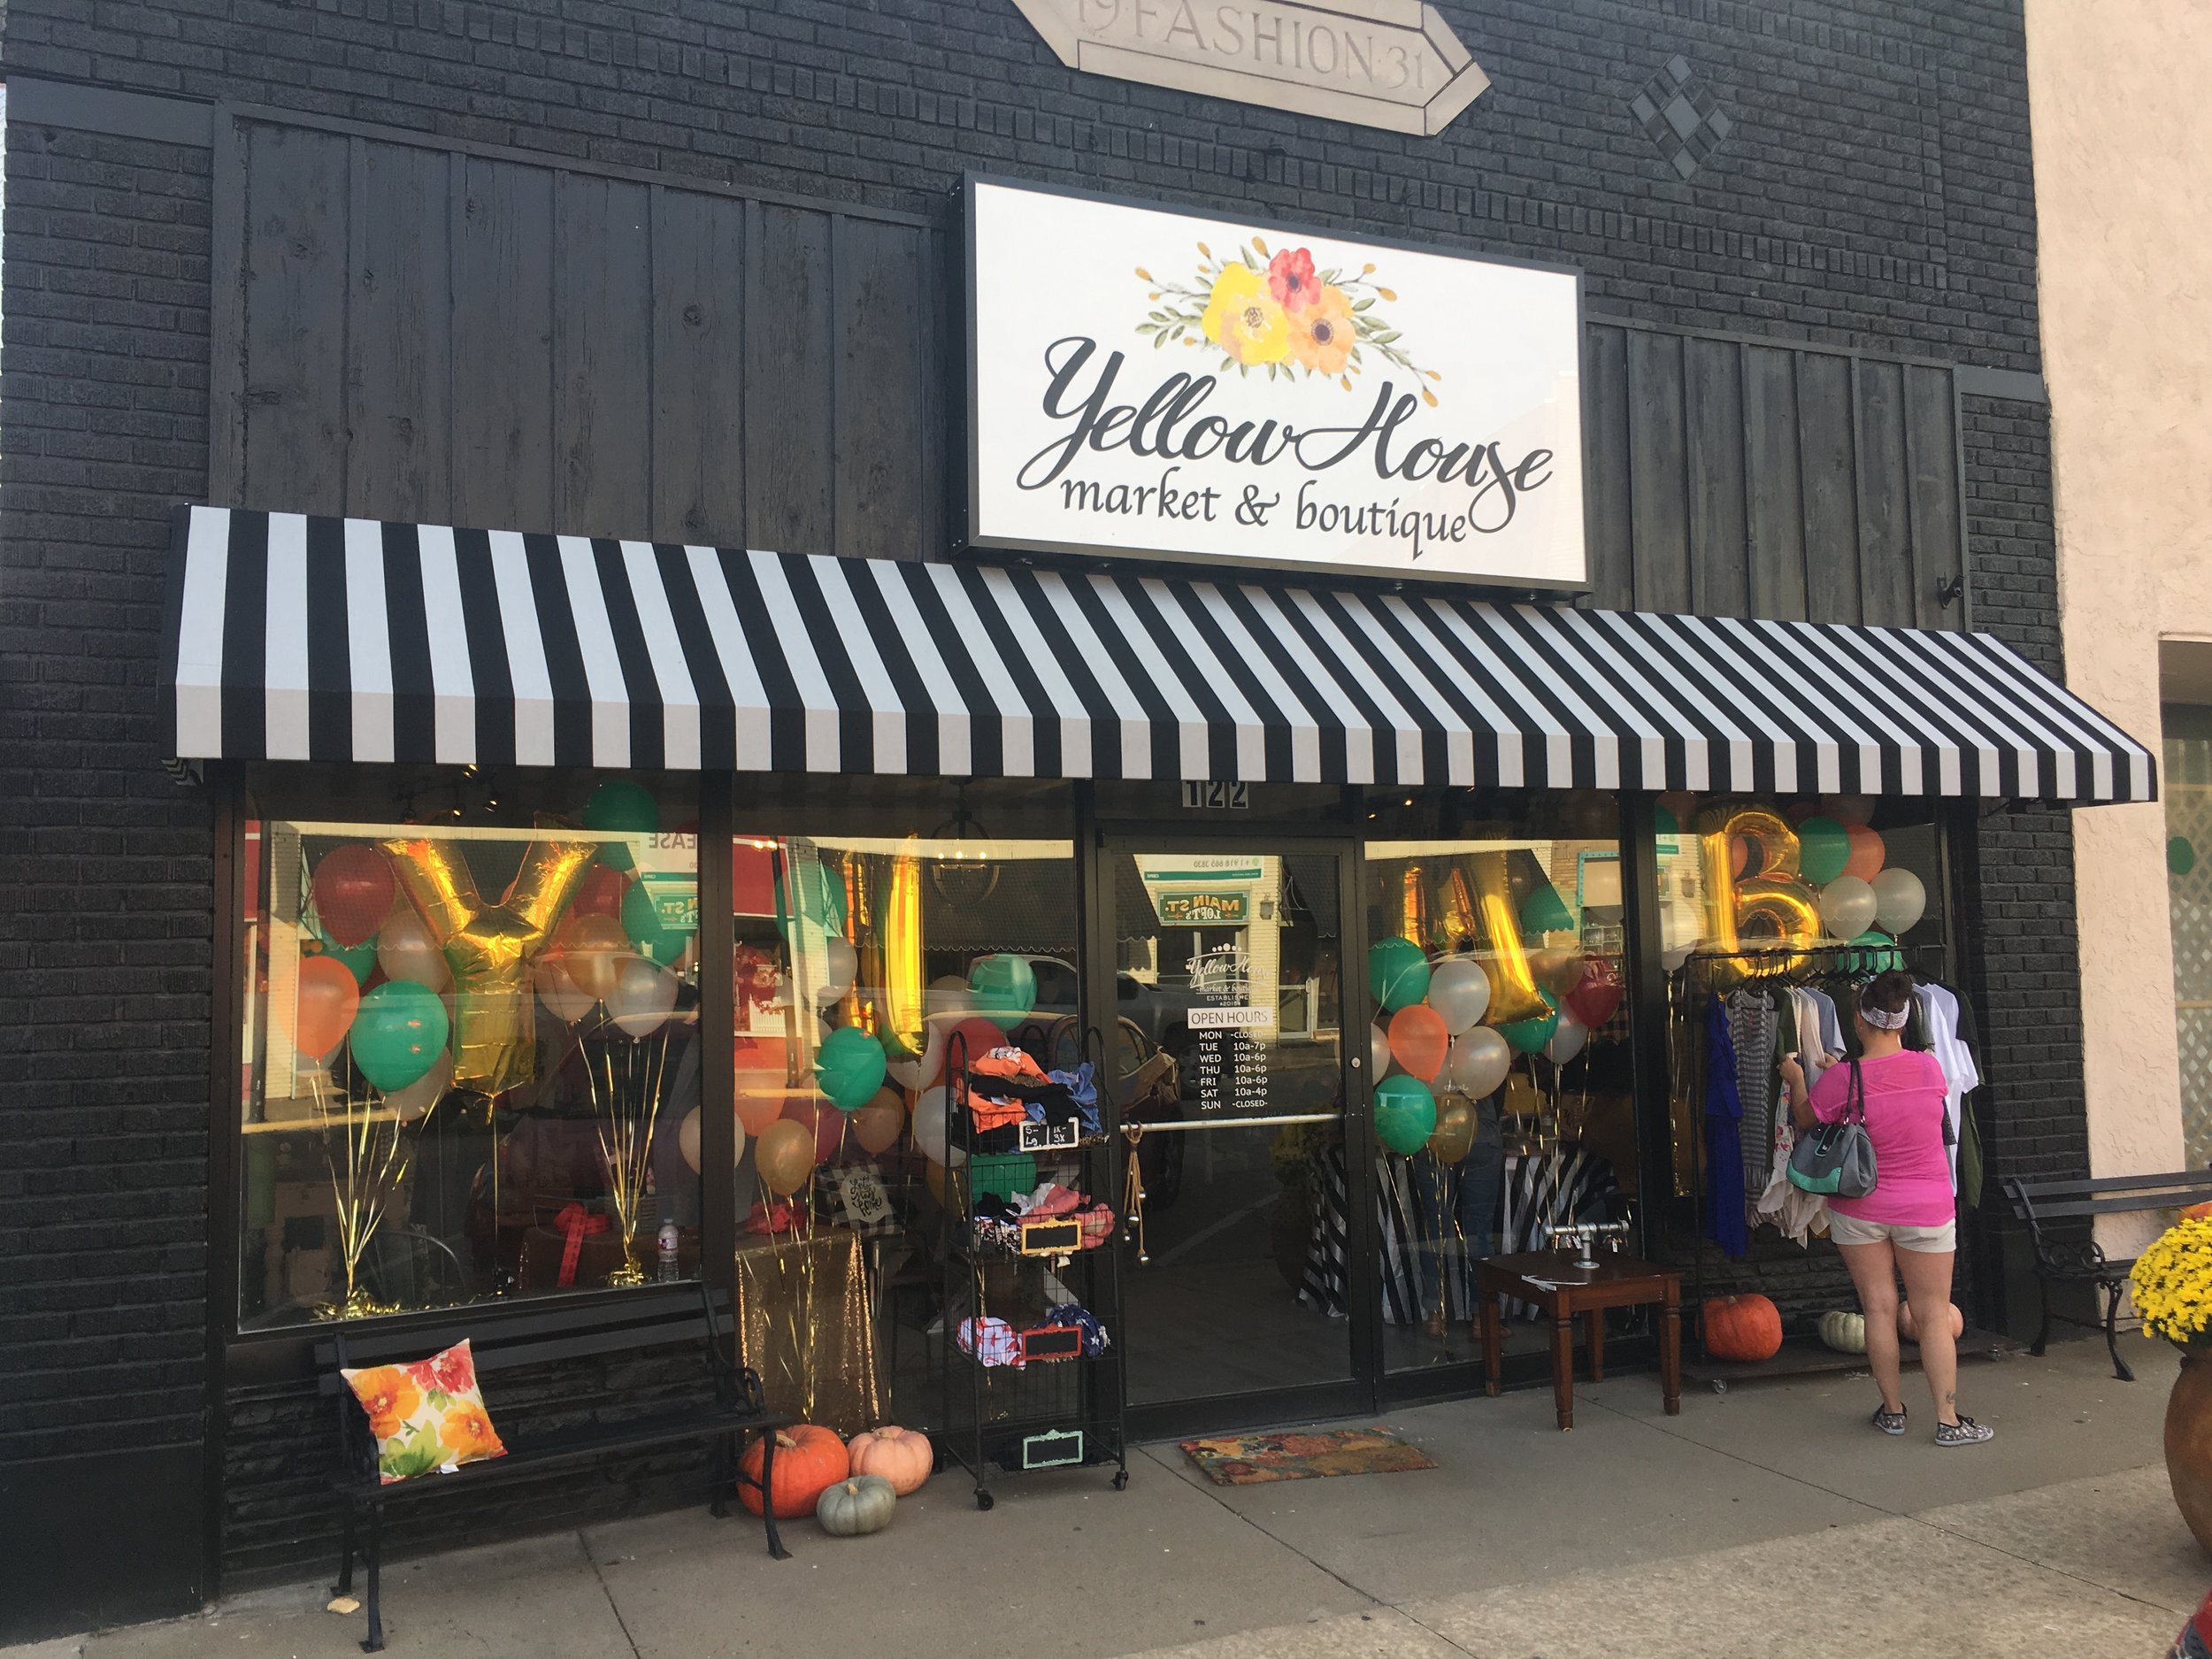 Yellow House Market & Boutique celebrates its Grand Reopening in downtown Sand Springs 170930 (Scott Emigh).jpg